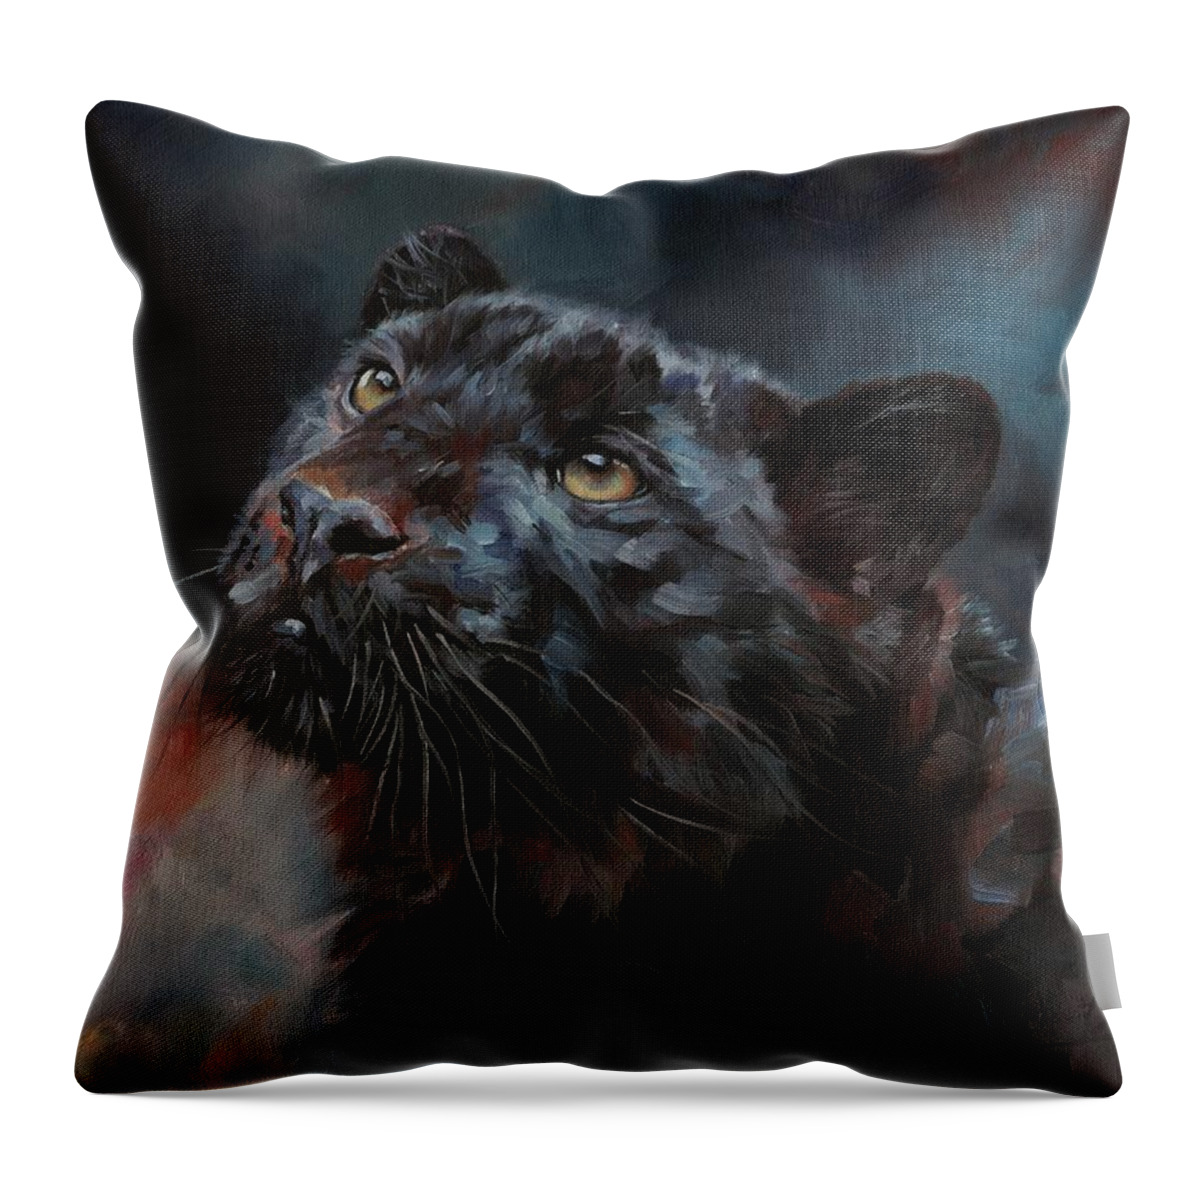 Black Panther Throw Pillow featuring the painting Black Panther 3 by David Stribbling